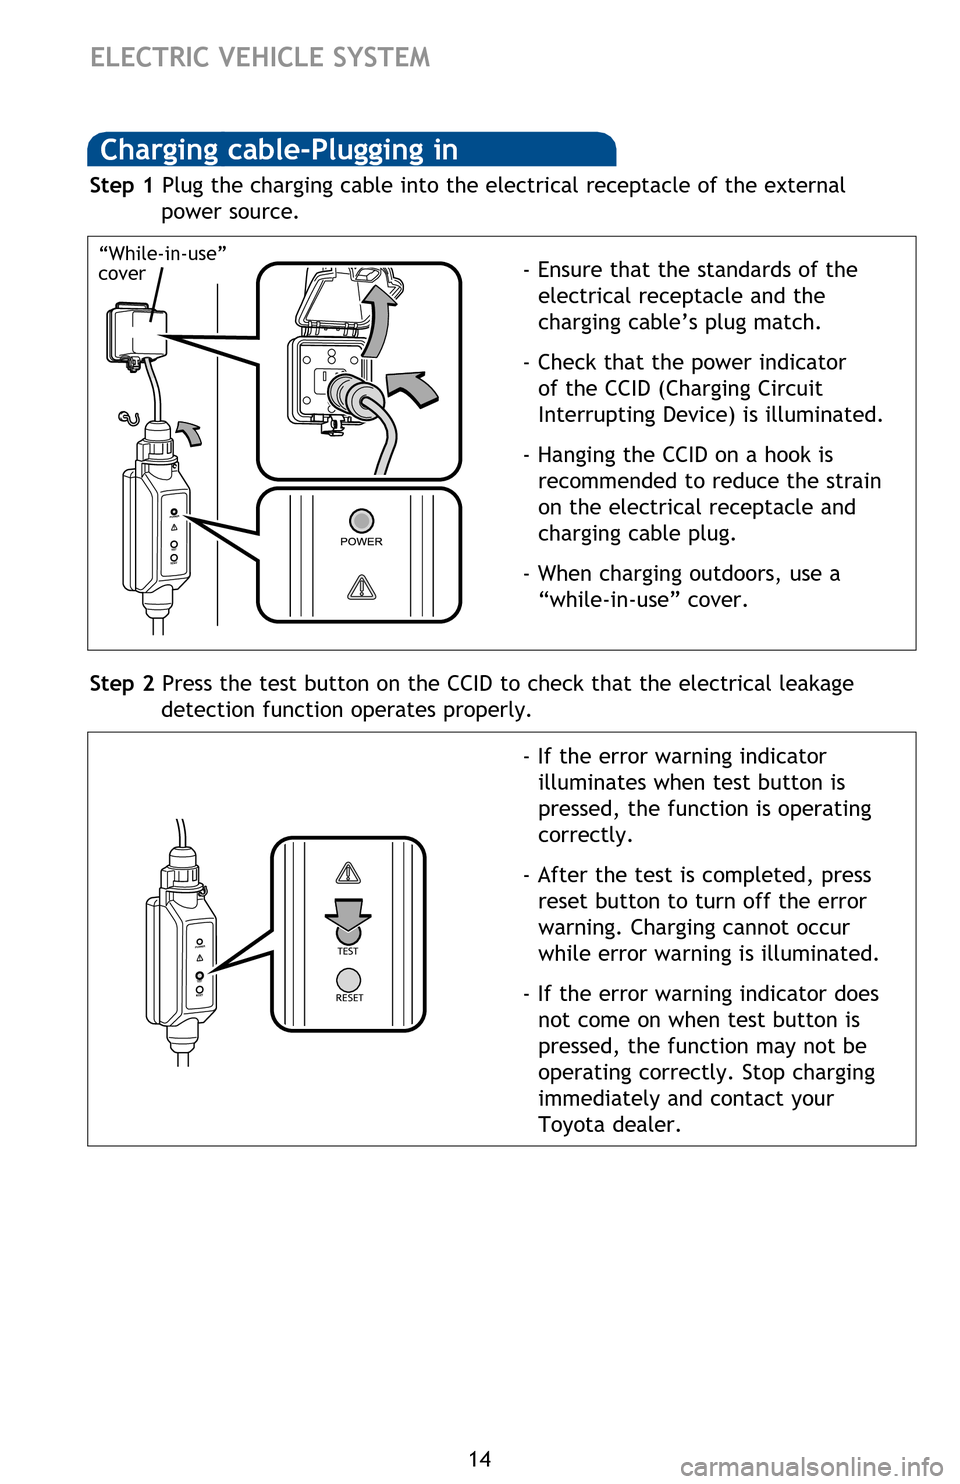 TOYOTA RAV4 EV 2012 1.G Quick Reference Guide 14
ELECTRIC VEHICLE SYSTEM
Charging cable-Plugging in
Step 1 Plug the charging cable into the electrical receptacle of the external power source.
- Ensure that the standards of the electrical receptac